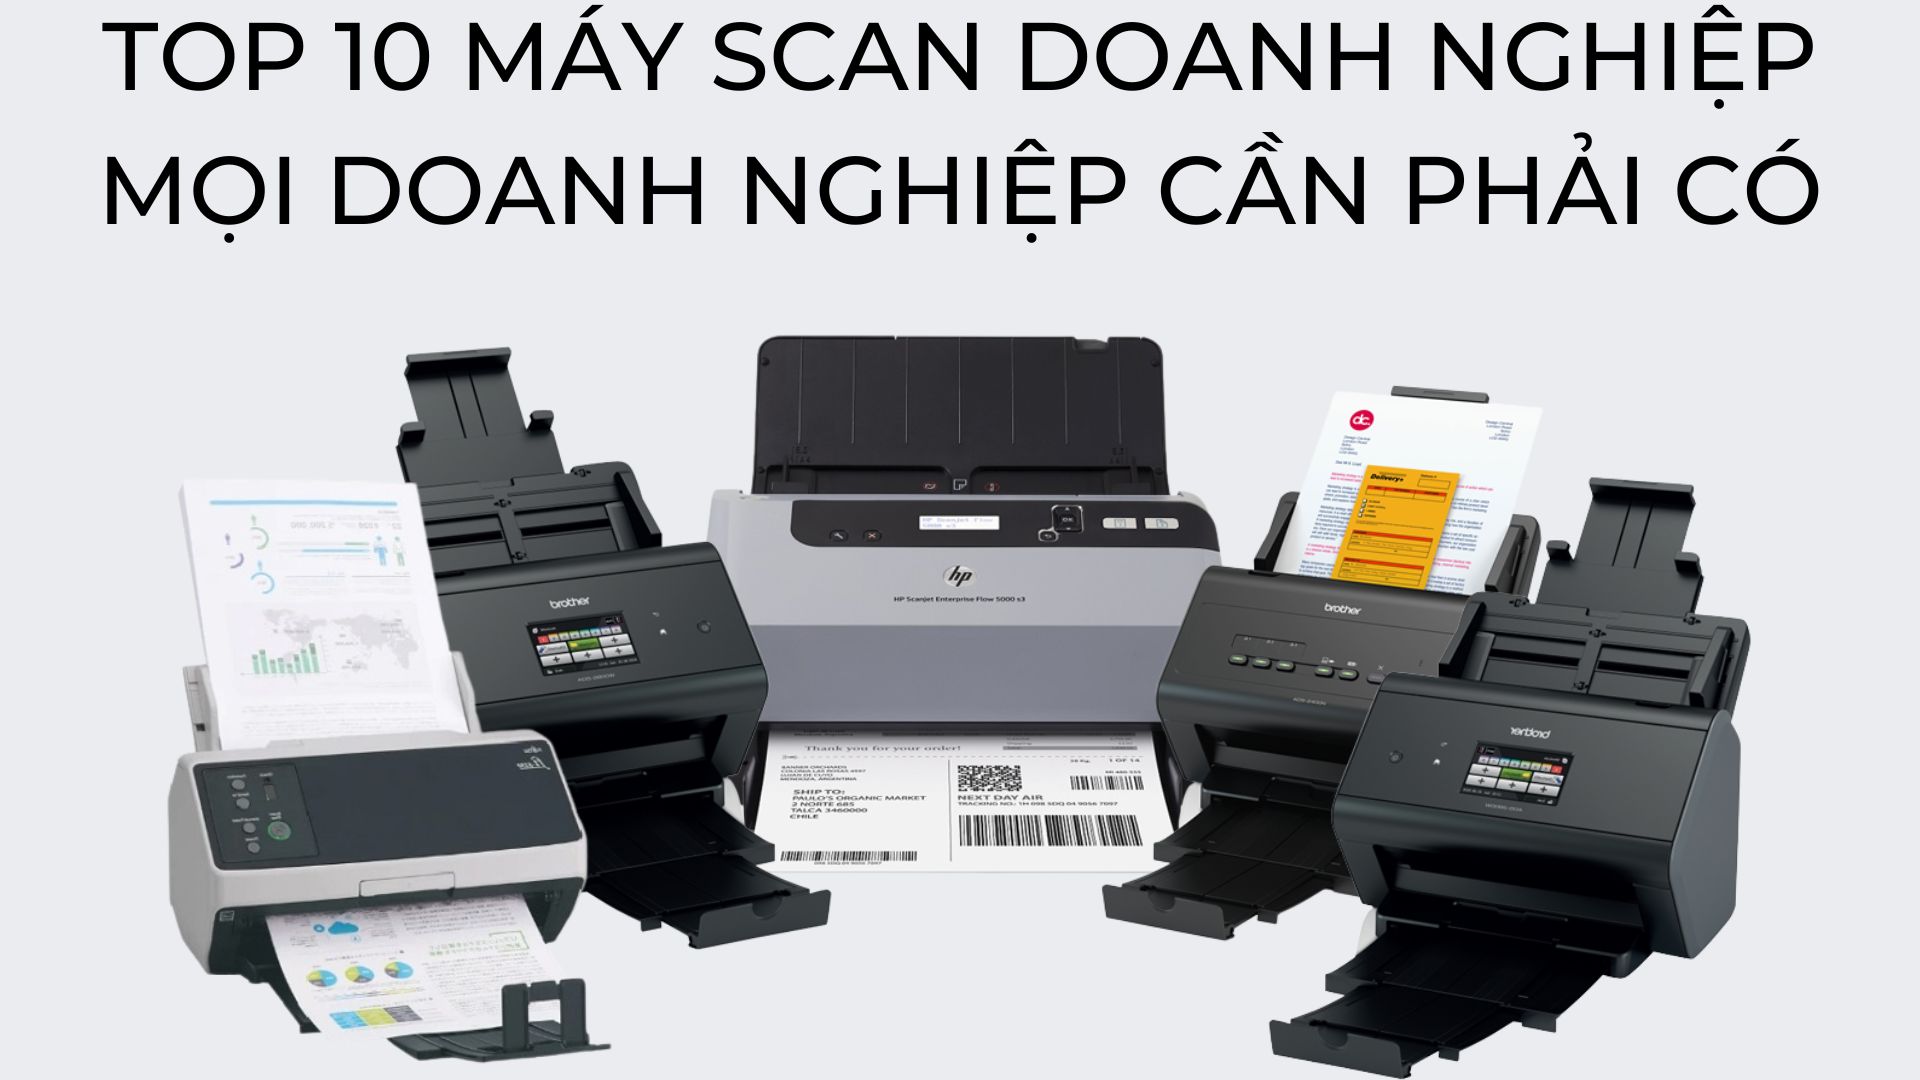 top-10-may-scan-doanh-nghiep-moi-doanh-nghiep-can-phai-co-01